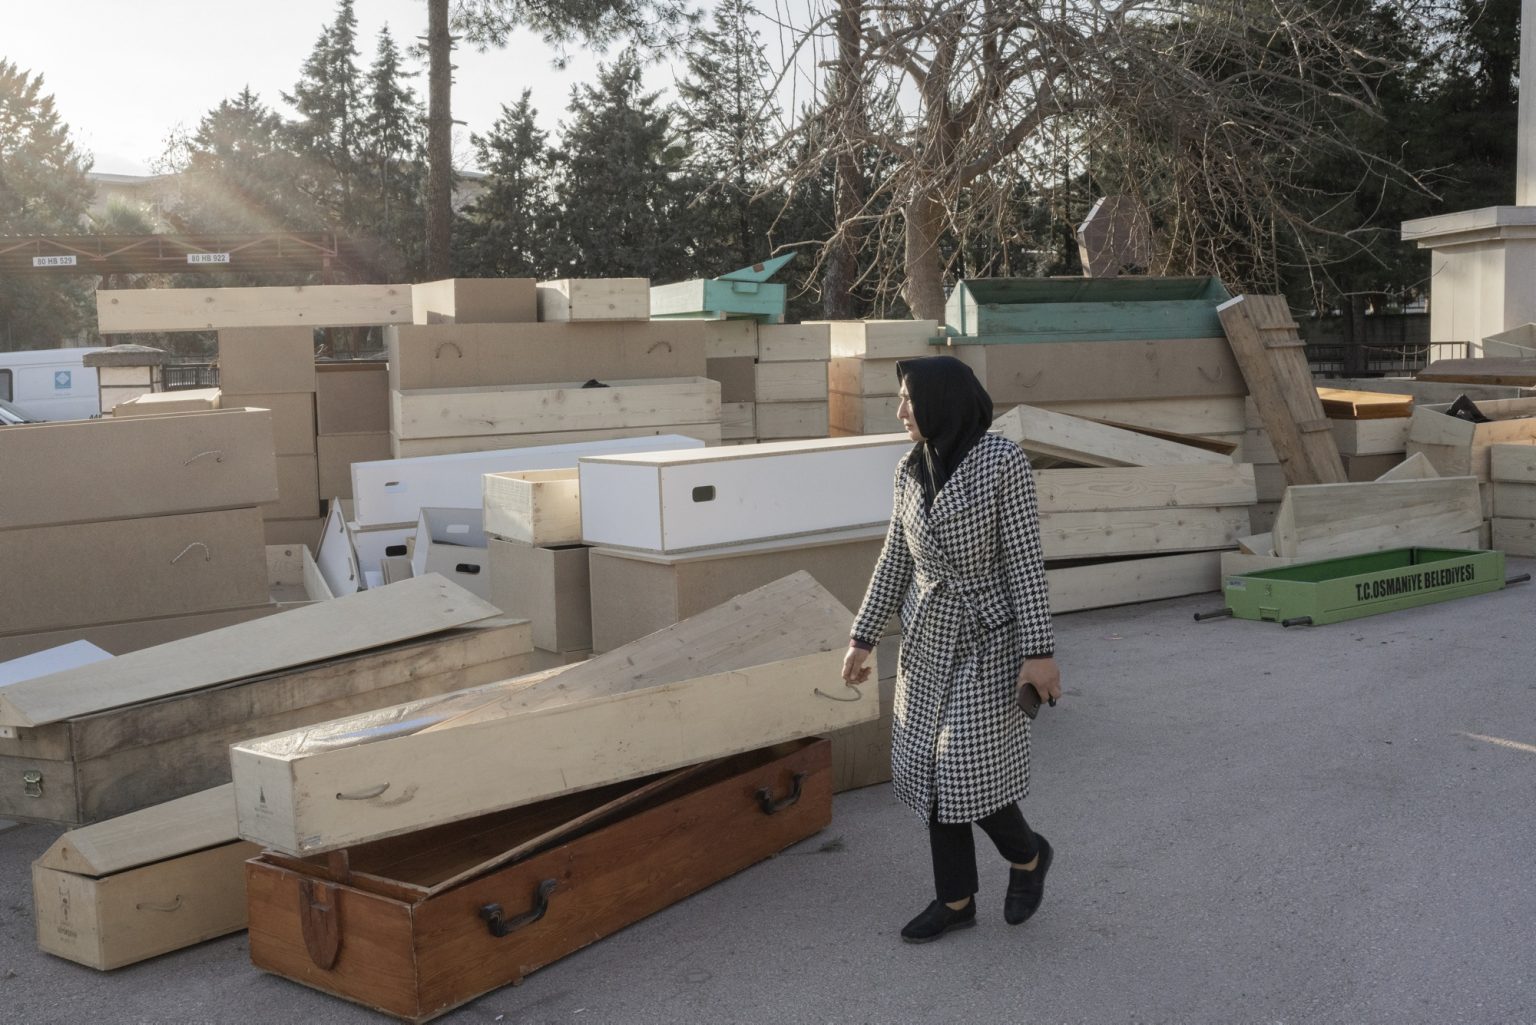 Osmaniye, Turkey, February 2023 - The aftermath of the earthquake that hit southern Turkey and northern Syria.    A woman walks in front of the coffins piled up at the entrance to Osmaniye Cemetery. ><
Osmaniye, Turchia, febbraio 2023  Le conseguenze del terremoto che ha colpito la Turchia del Sud e la Siria del nord.